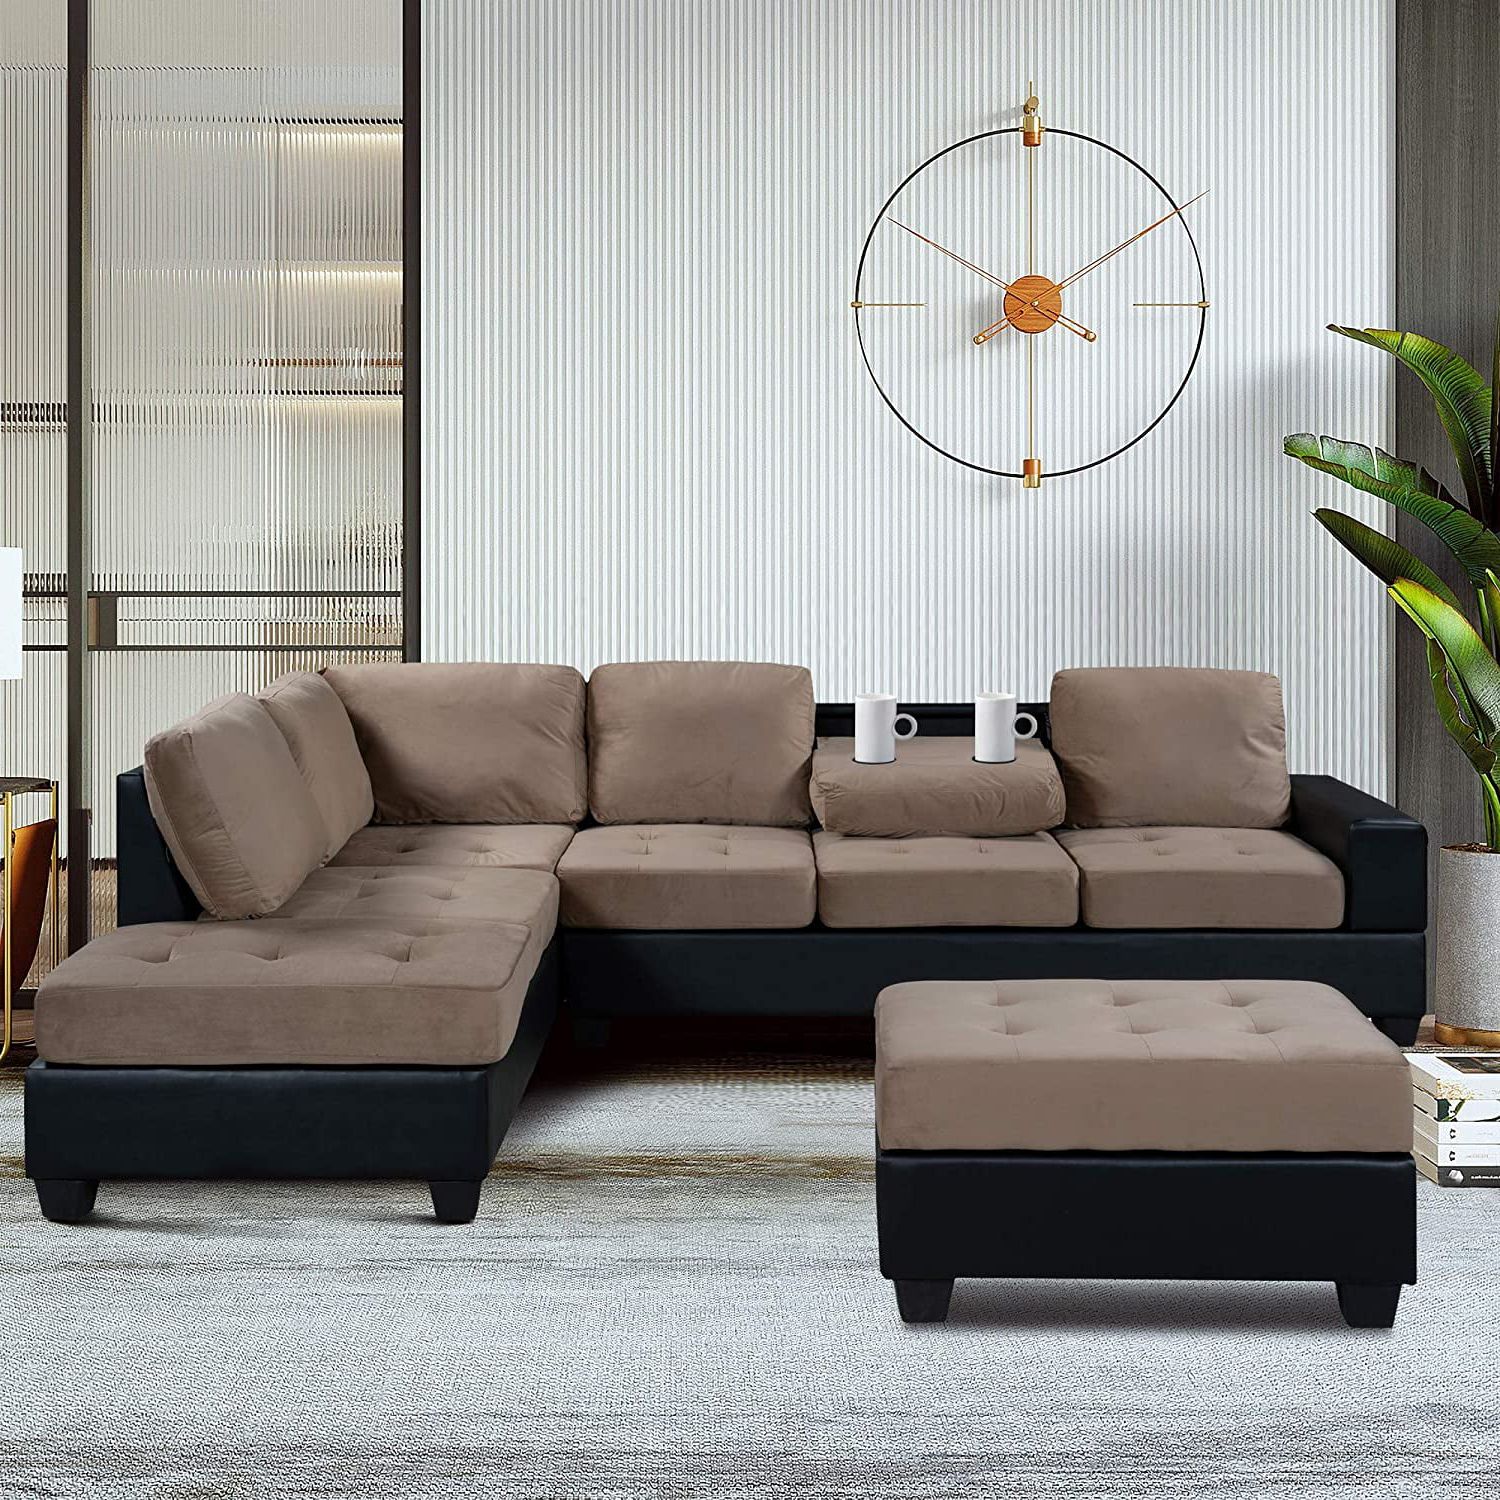 3 Piece Convertible Sectional Sofa L Shaped Couch With Reversible Throughout L Shape Couches With Reversible Chaises (View 9 of 20)